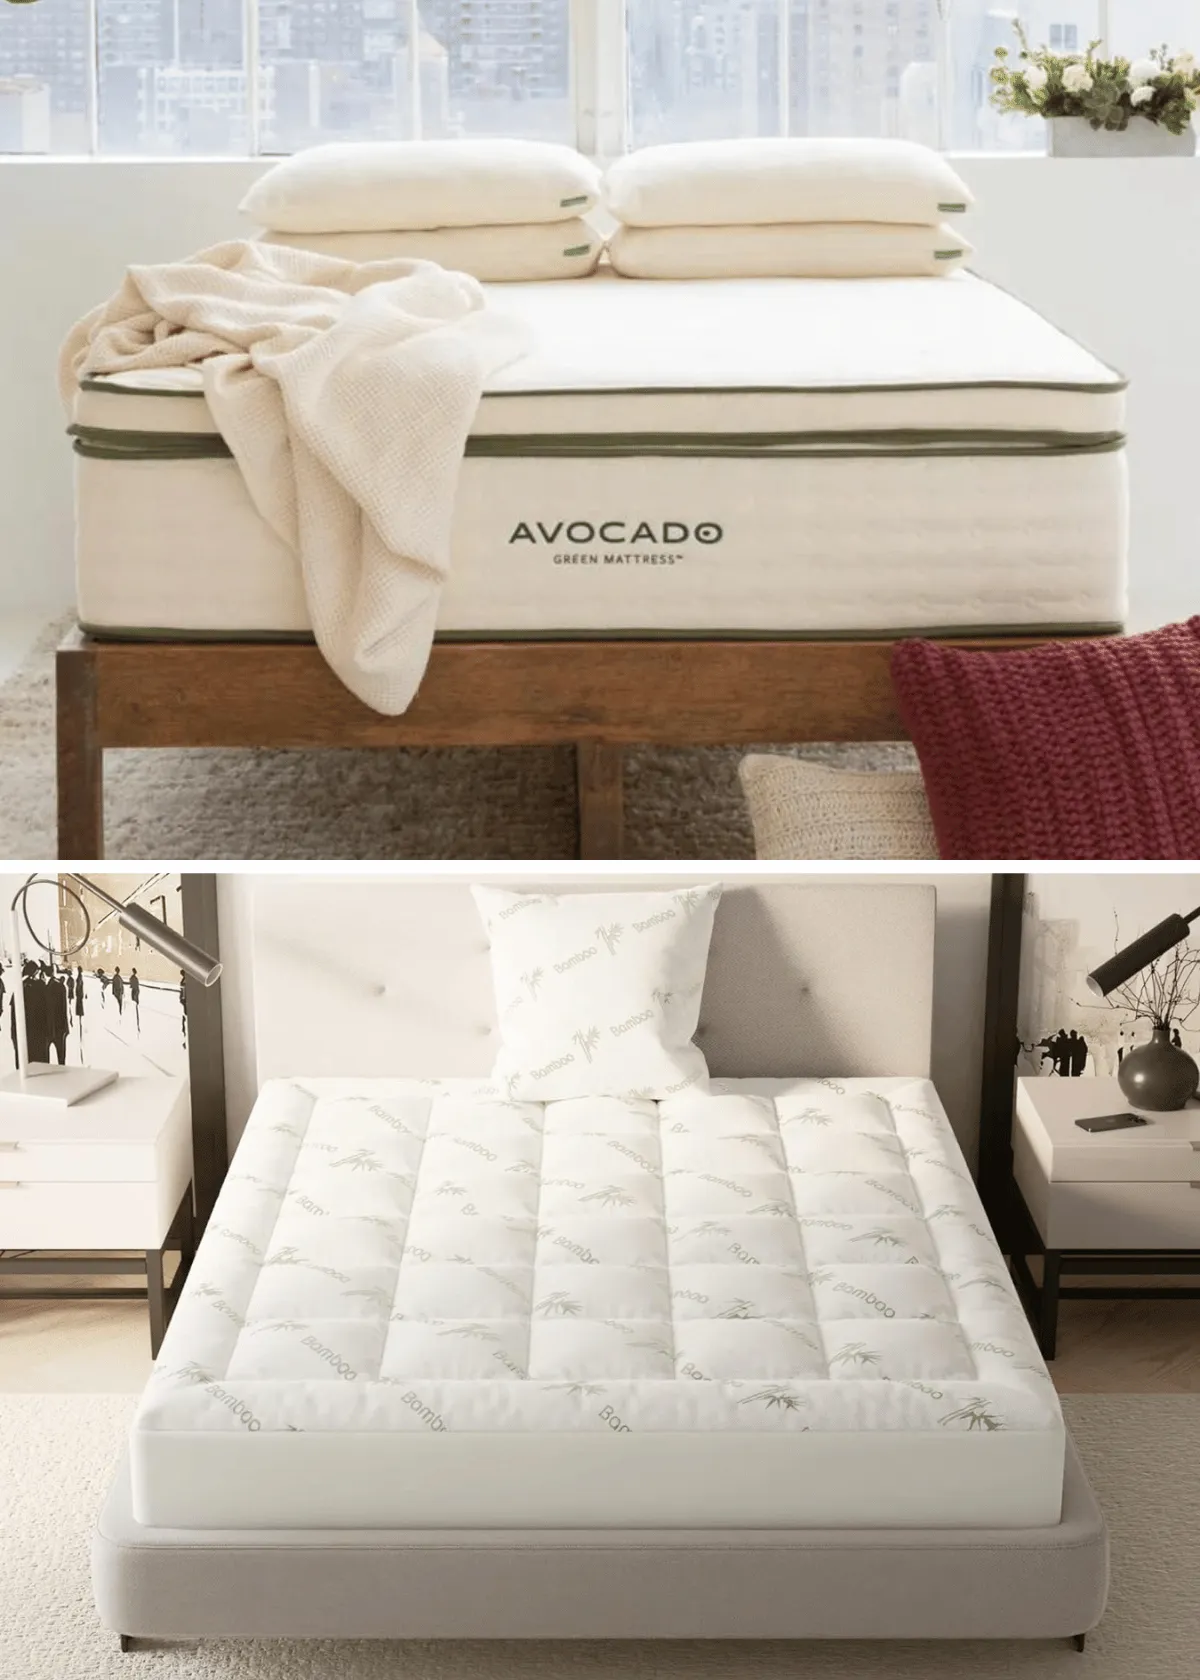 "Which Pillow Top Mattress Topper Is Best for Back Pain Relief?"